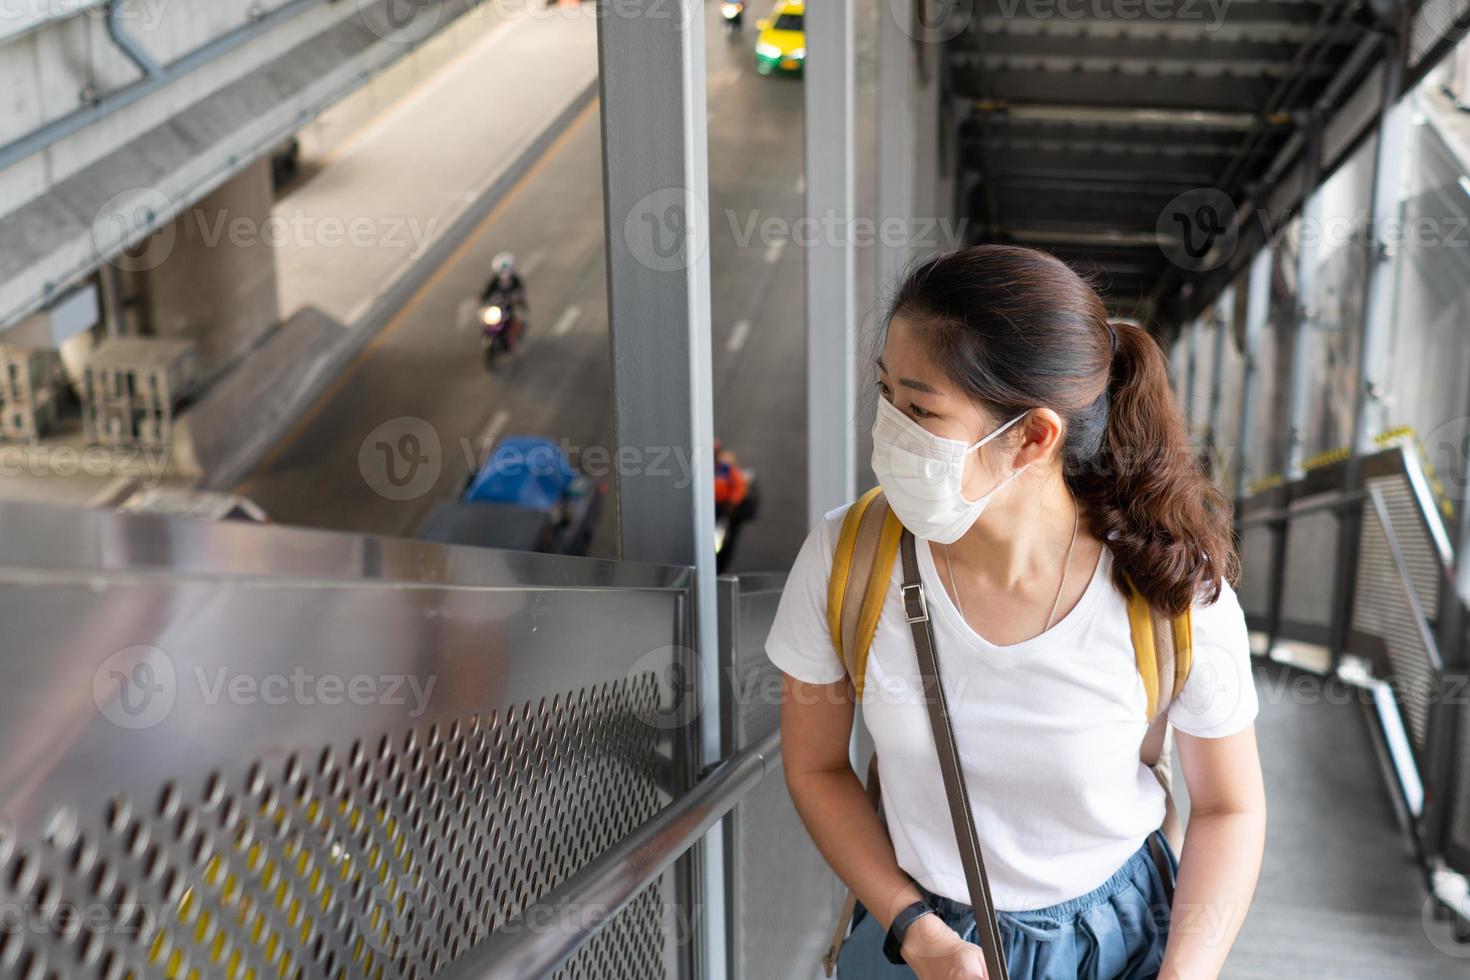 Young Asian woman with smiling face and wearing face maskas a social distancing guideline. She is using escalator to go upstair to the sky train station. new normal lifestyle, covid-19, coronavirus concept photo